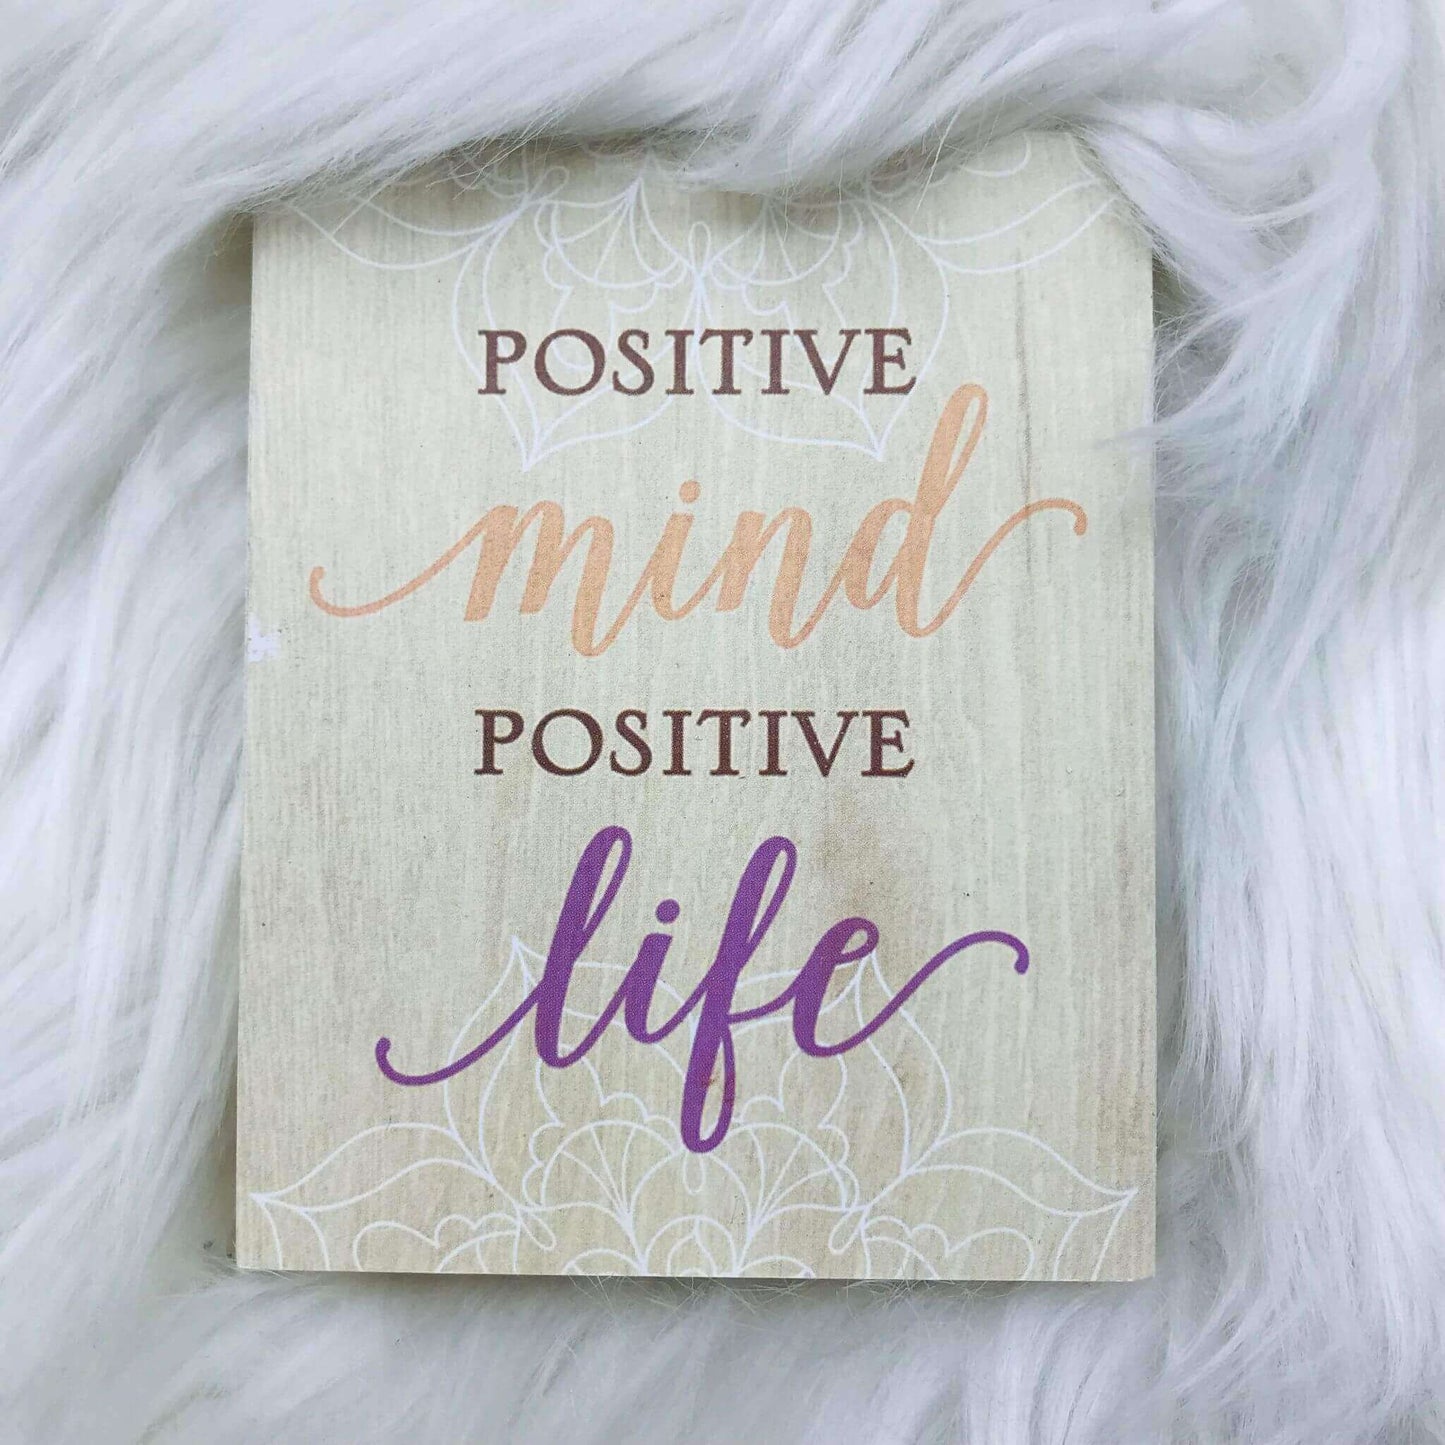 Magnetic Desk Bloc with Affirmations (various) at $10 only from Spiral Rain